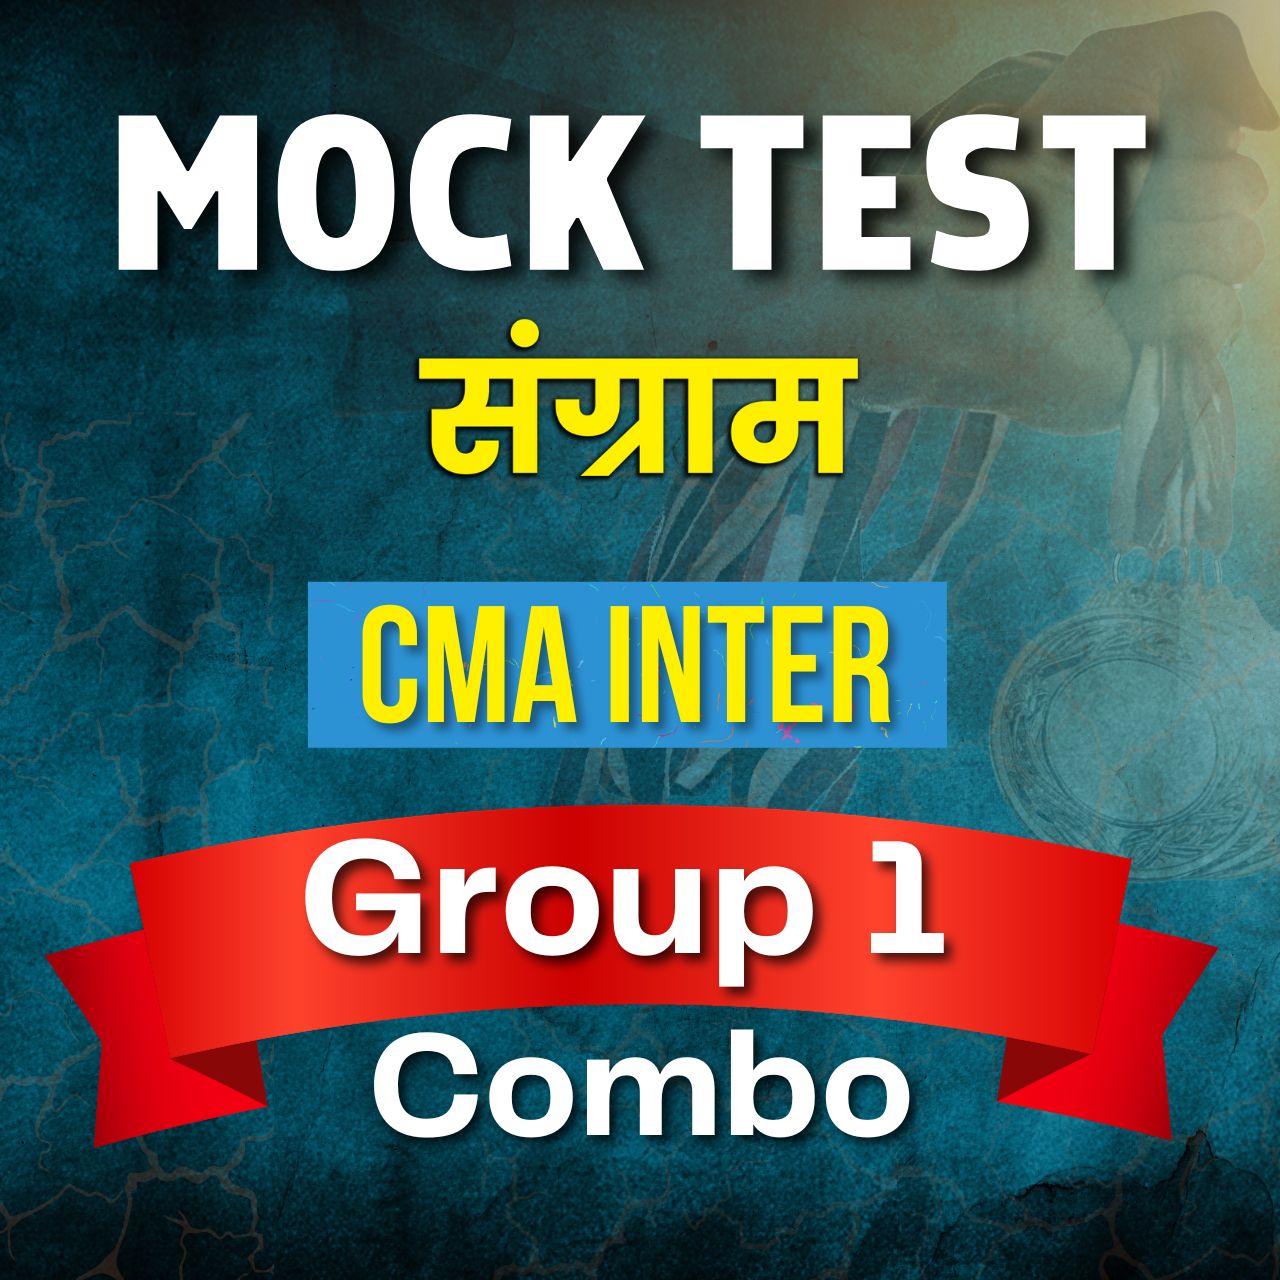 CMA Inter Group 1 Combo (Paper 1 - 4) Mock Test